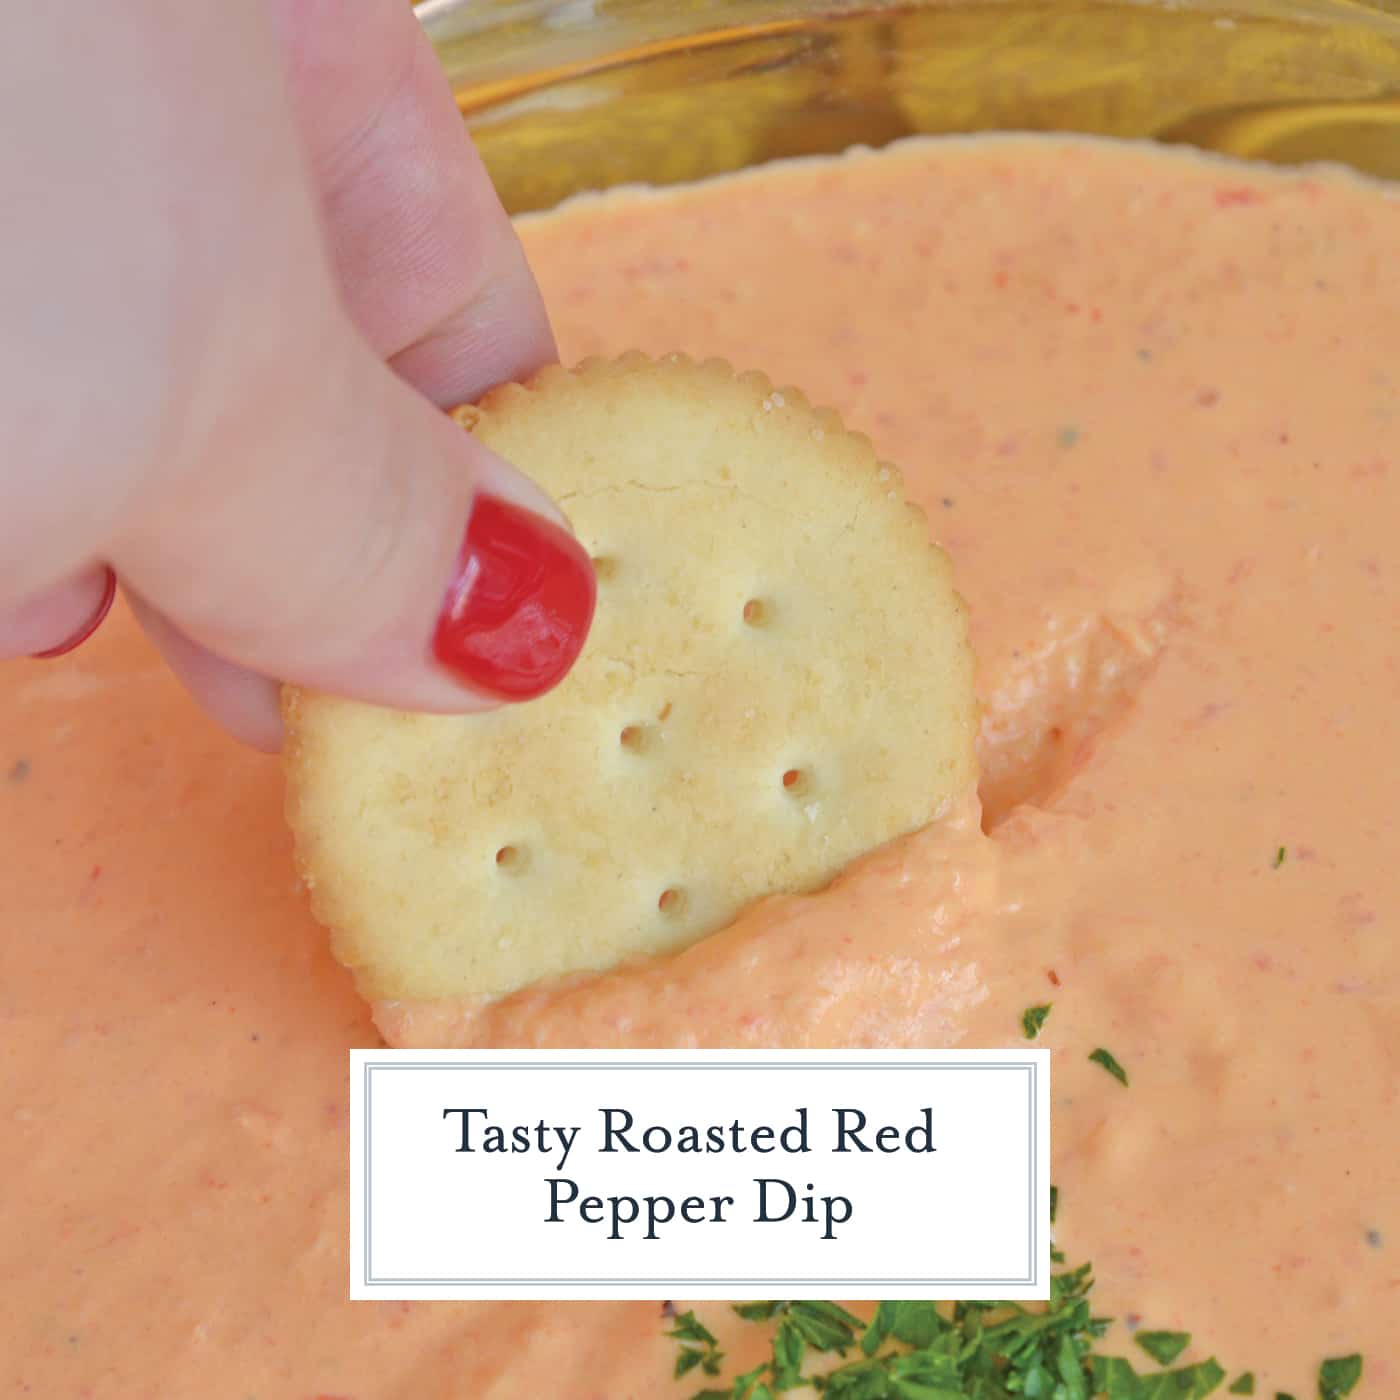 Roasted Red Pepper Dip is tangy, light, and irresistibly delicious. Served warm or cold, it is perfect for parties or an afternoon snack. #roastedredpepperdip #chipdip #roastedredpepper www.savoryexperiments.com